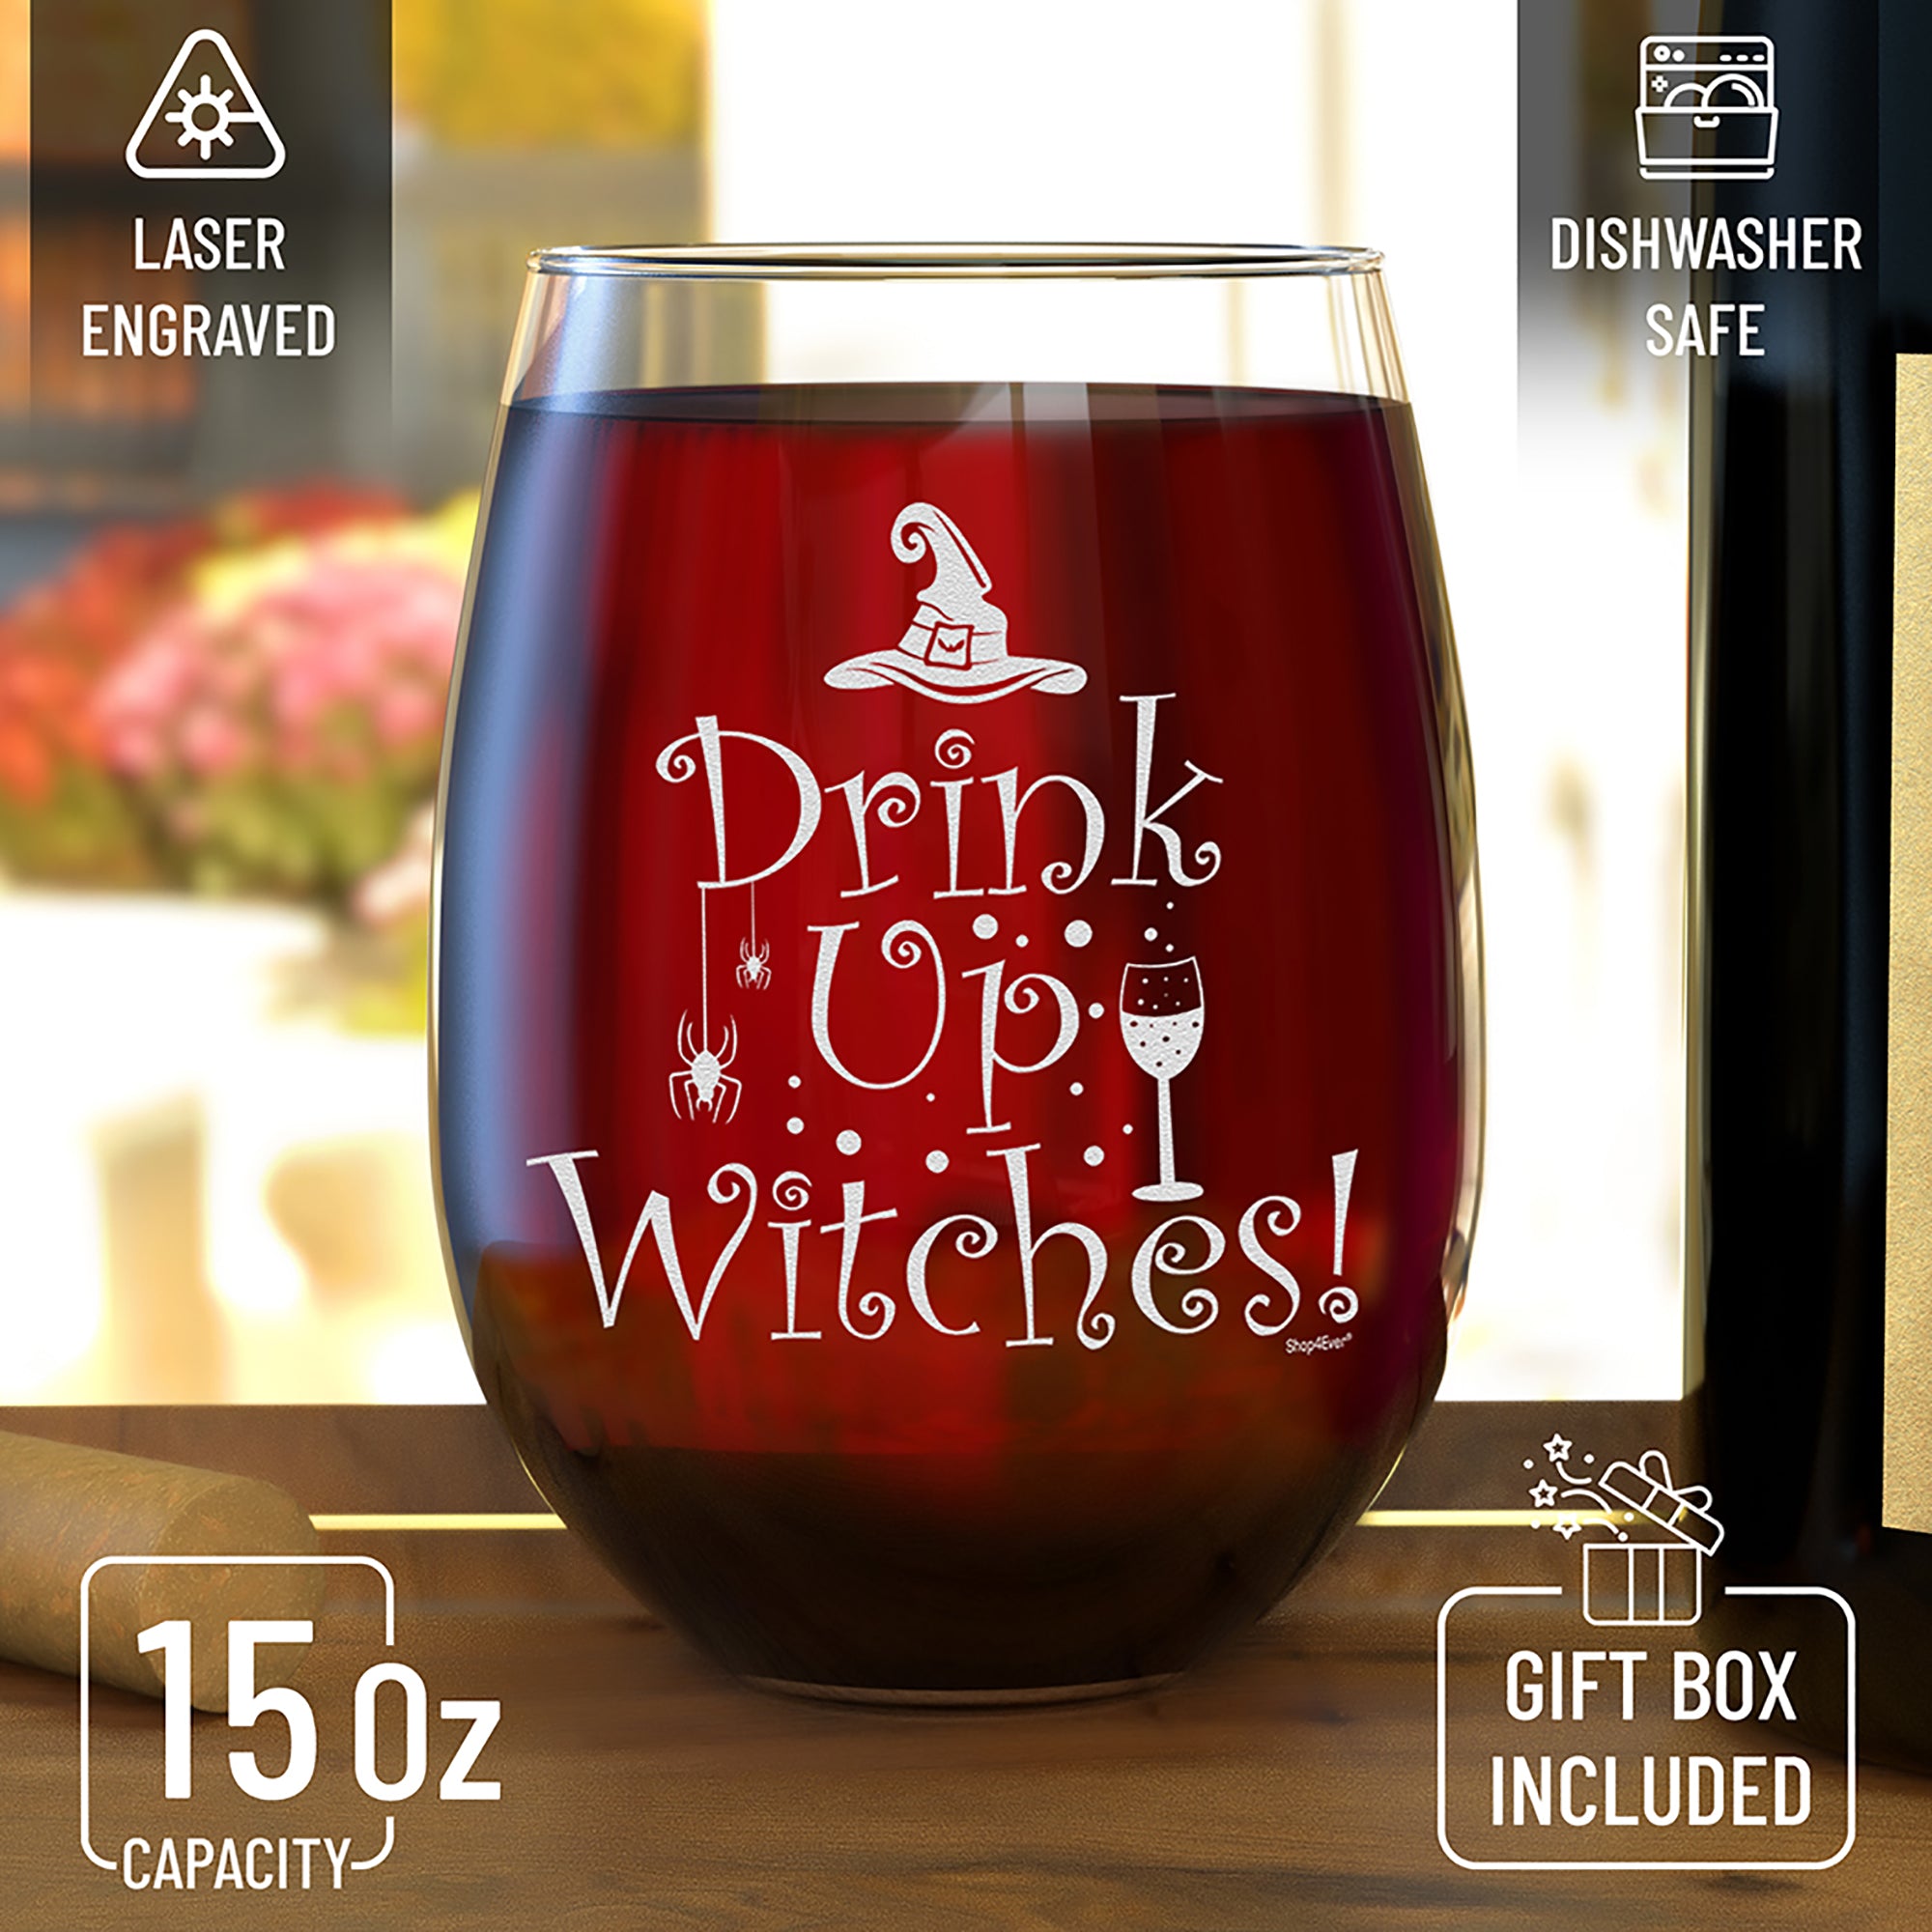 Drink Up Witches! Laser Engraved Funny Halloween Hocus Pocus Stemless Wine Glass